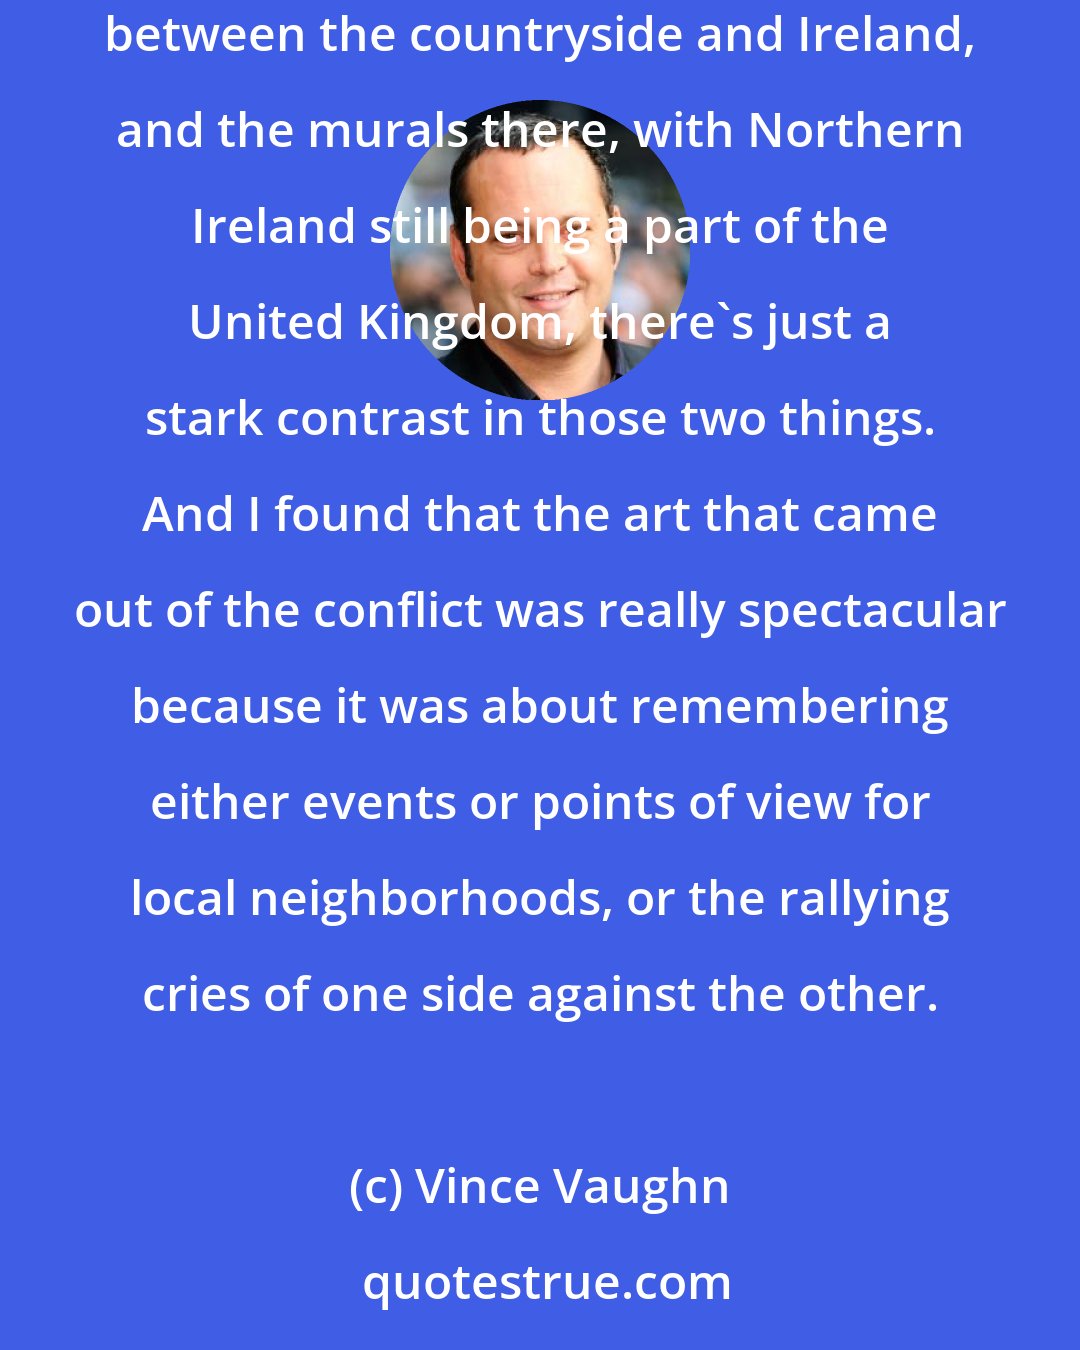 Vince Vaughn: I was filming a movie in London, and I drove through Ireland. It was quite beautiful, and the countryside was really remarkable. The contrast between the countryside and Ireland, and the murals there, with Northern Ireland still being a part of the United Kingdom, there's just a stark contrast in those two things. And I found that the art that came out of the conflict was really spectacular because it was about remembering either events or points of view for local neighborhoods, or the rallying cries of one side against the other.